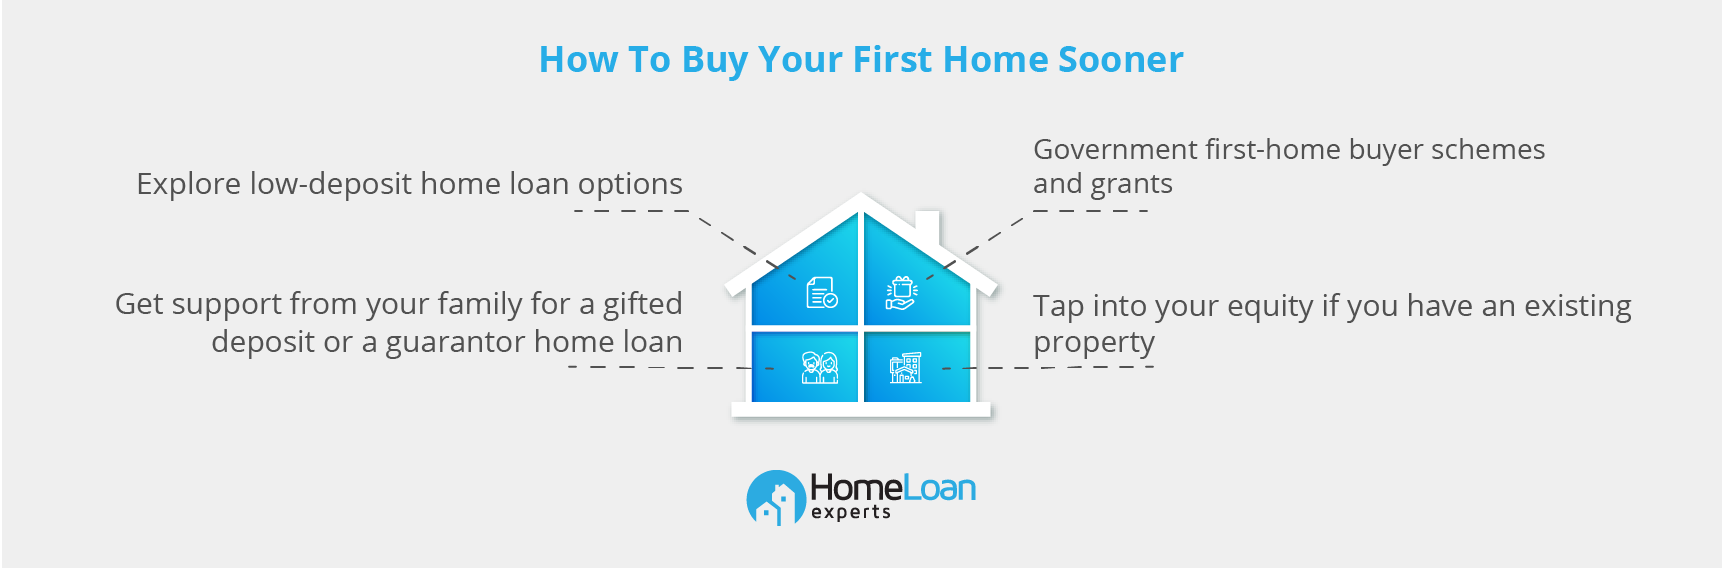 Banner sharing tips on how to buy your first home sooner